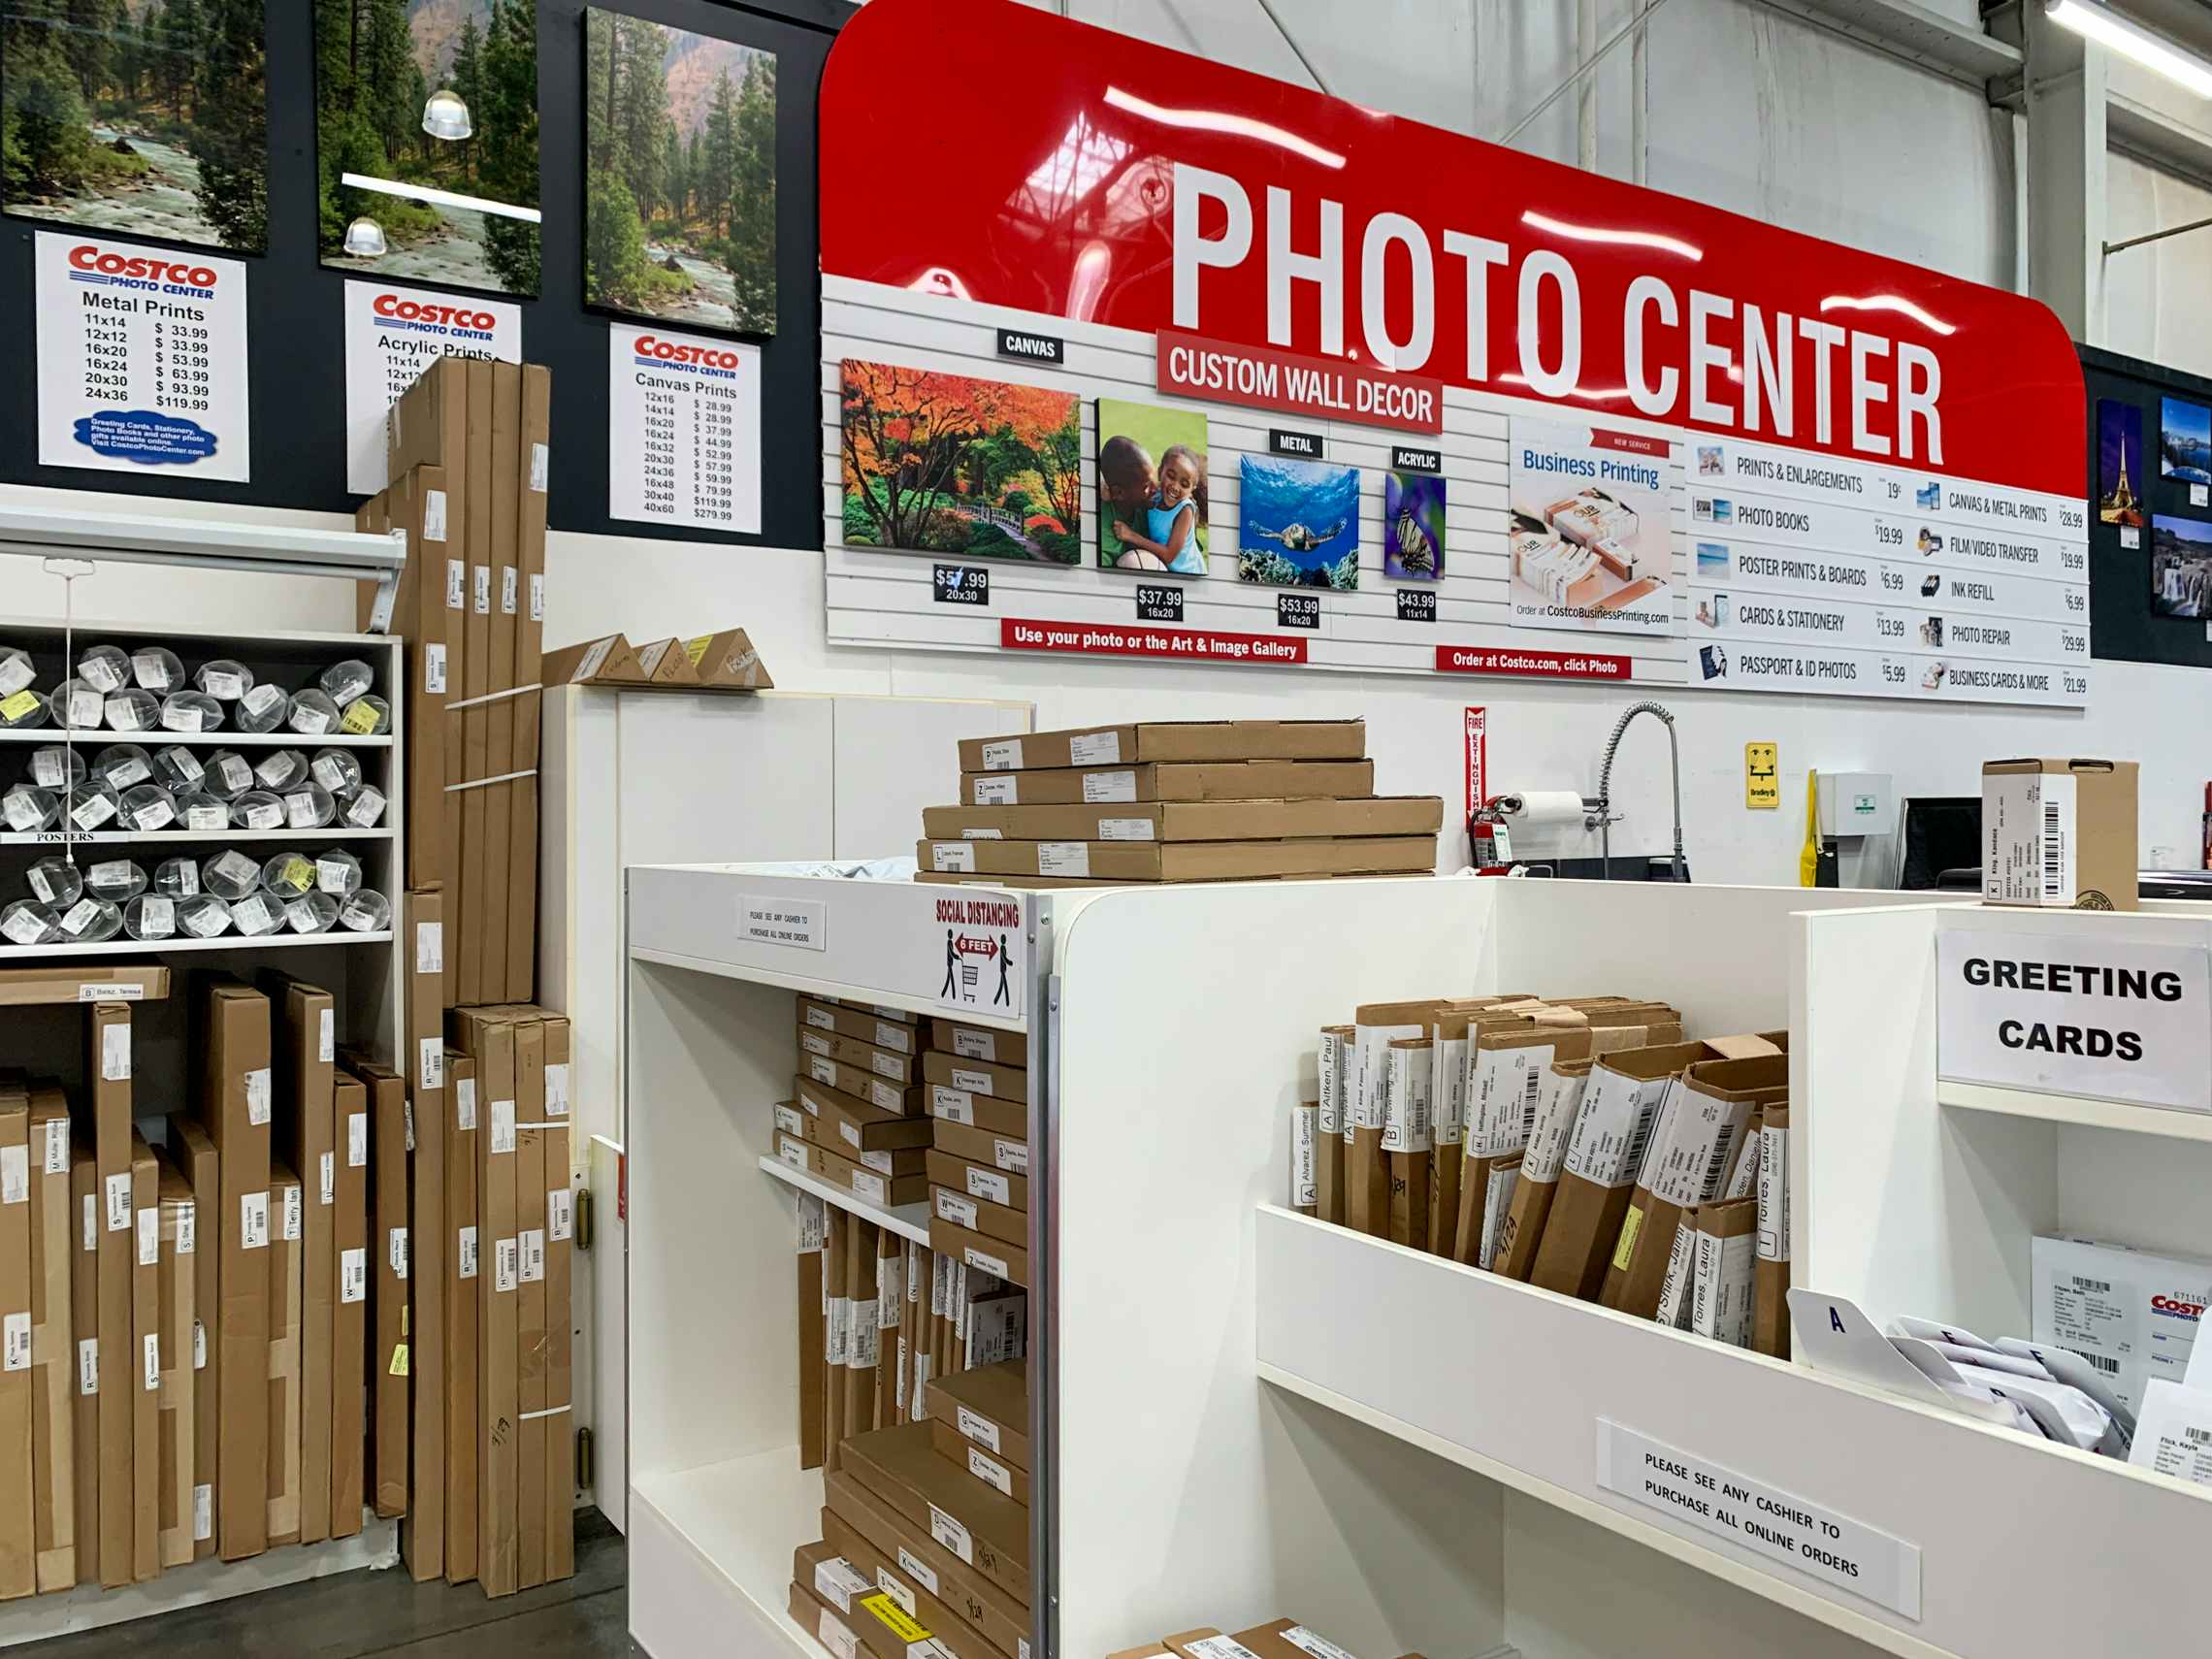 Costco photo center posters and custom prints shelves.